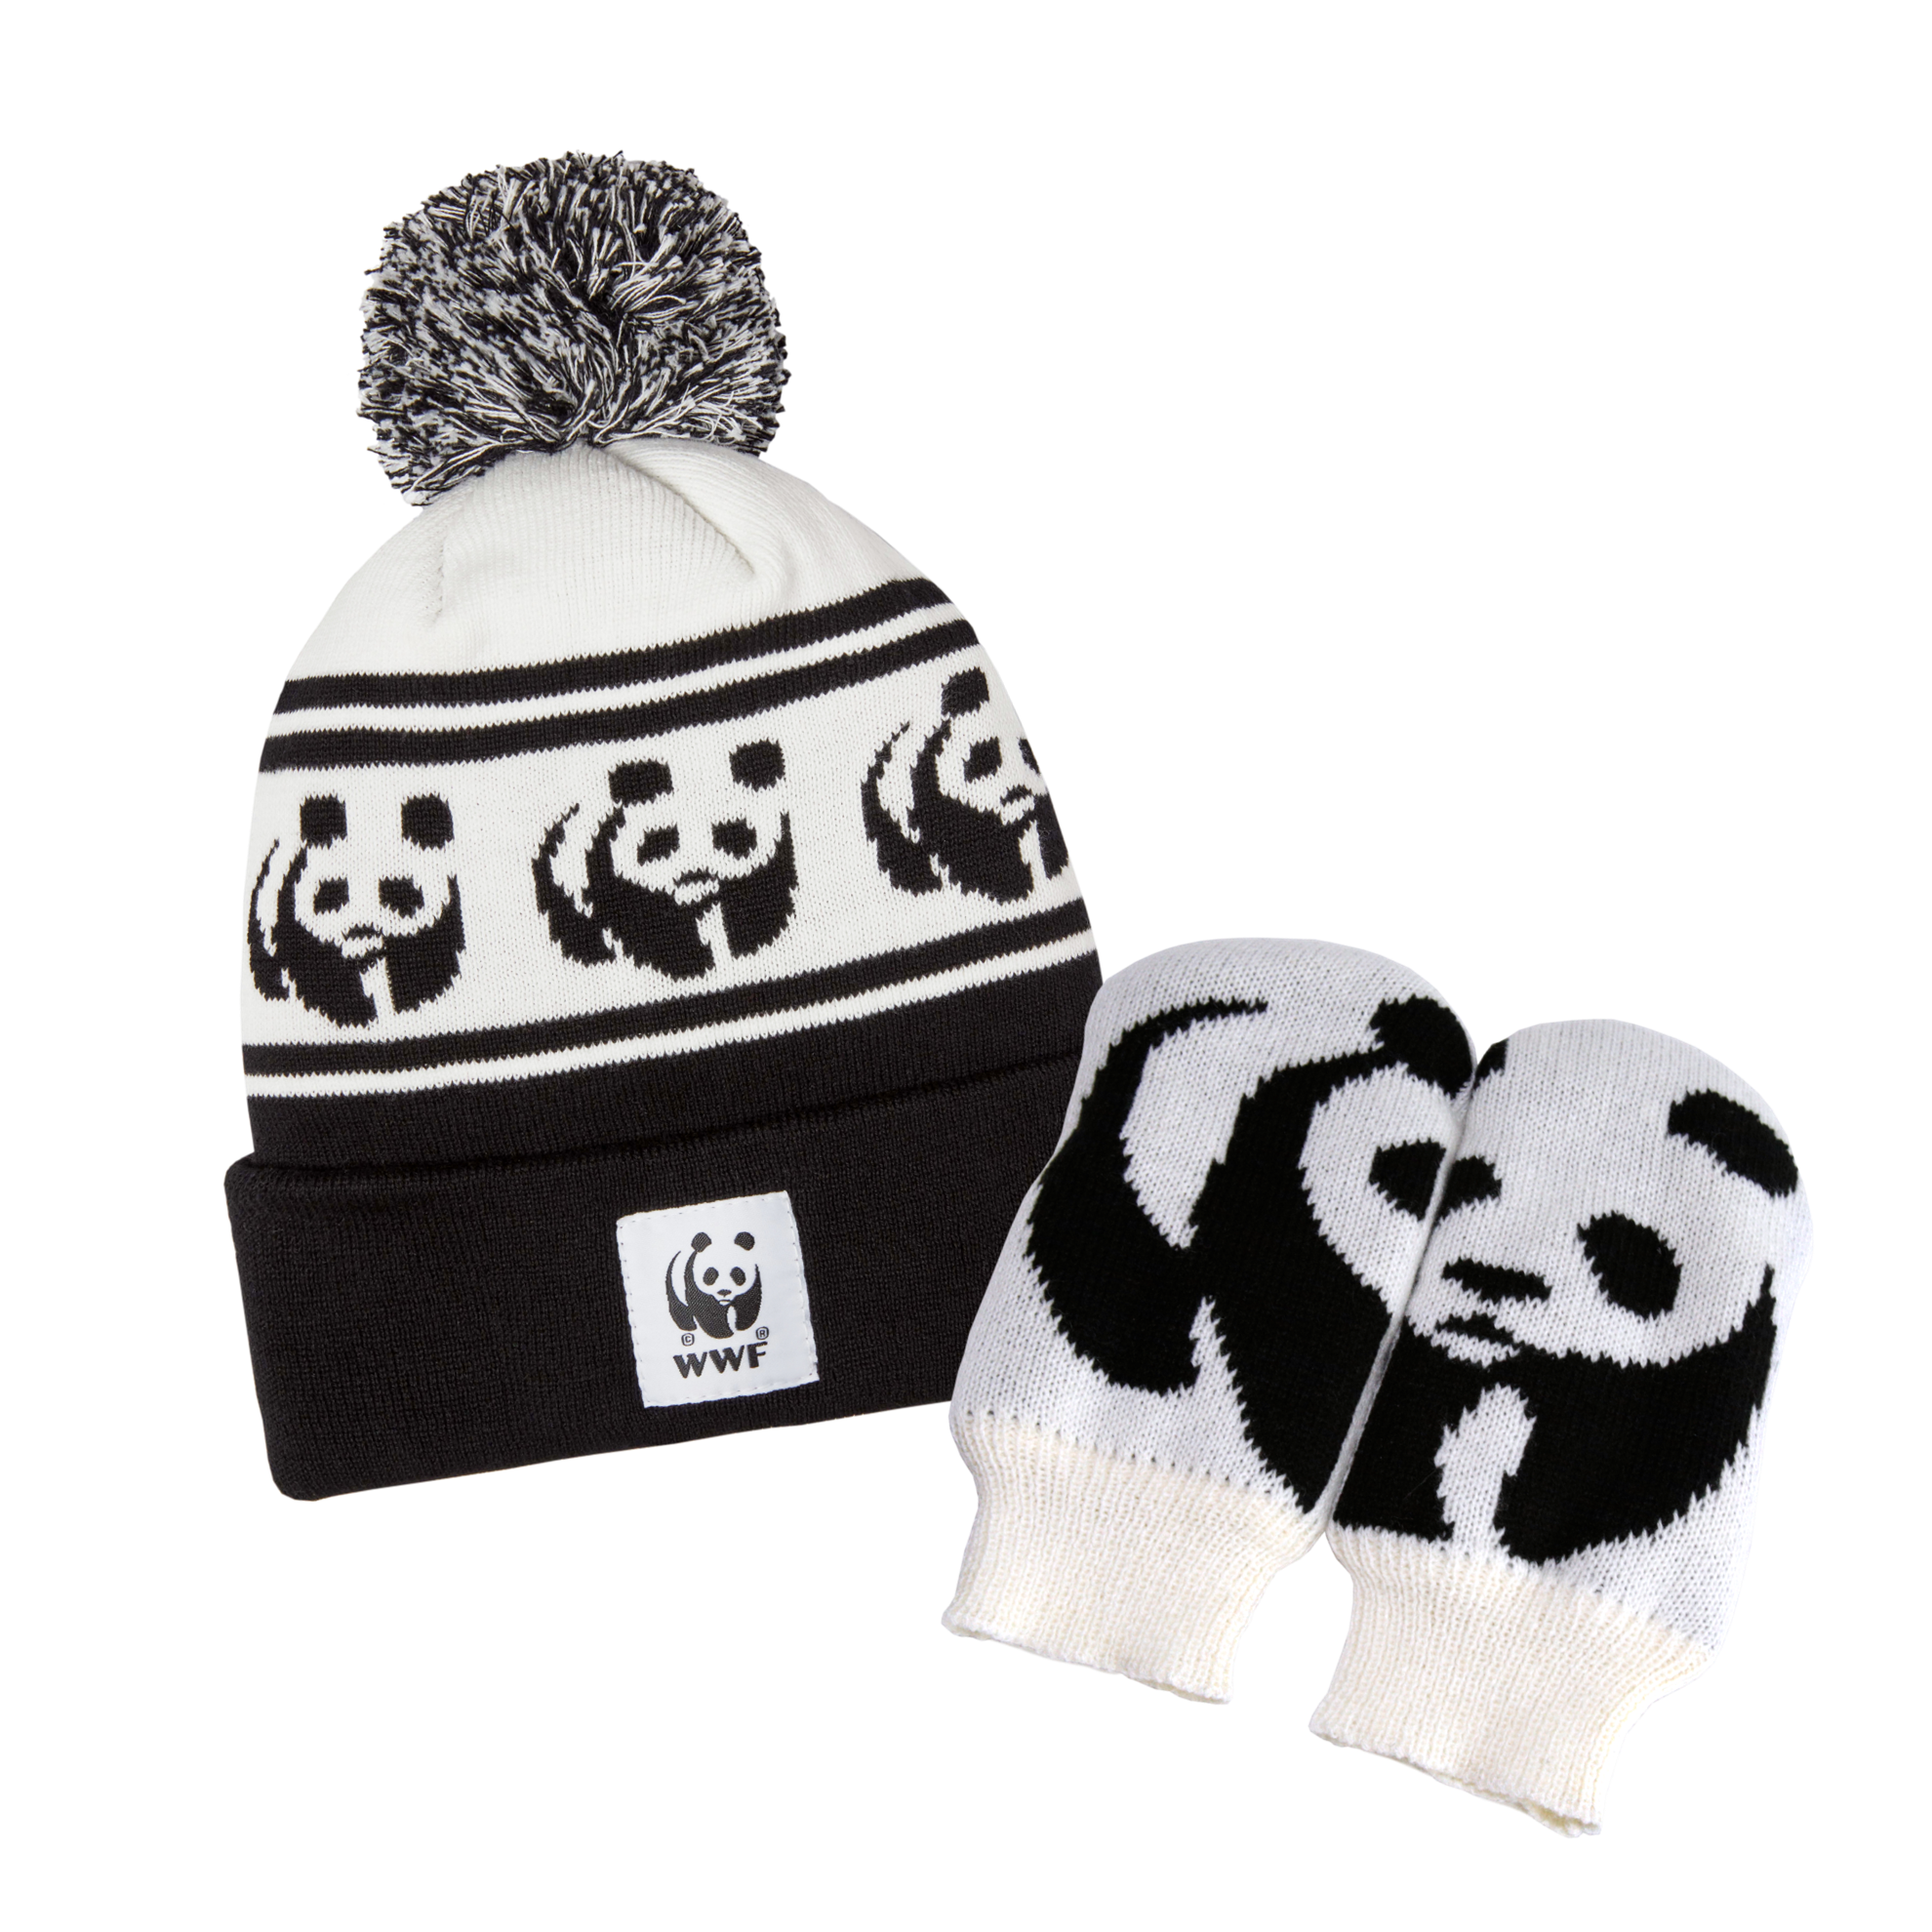 Left to right: the Panda Toque with black and white pom pom and WWF logo patch, Panda Mittens with WWF Panda logo on the front